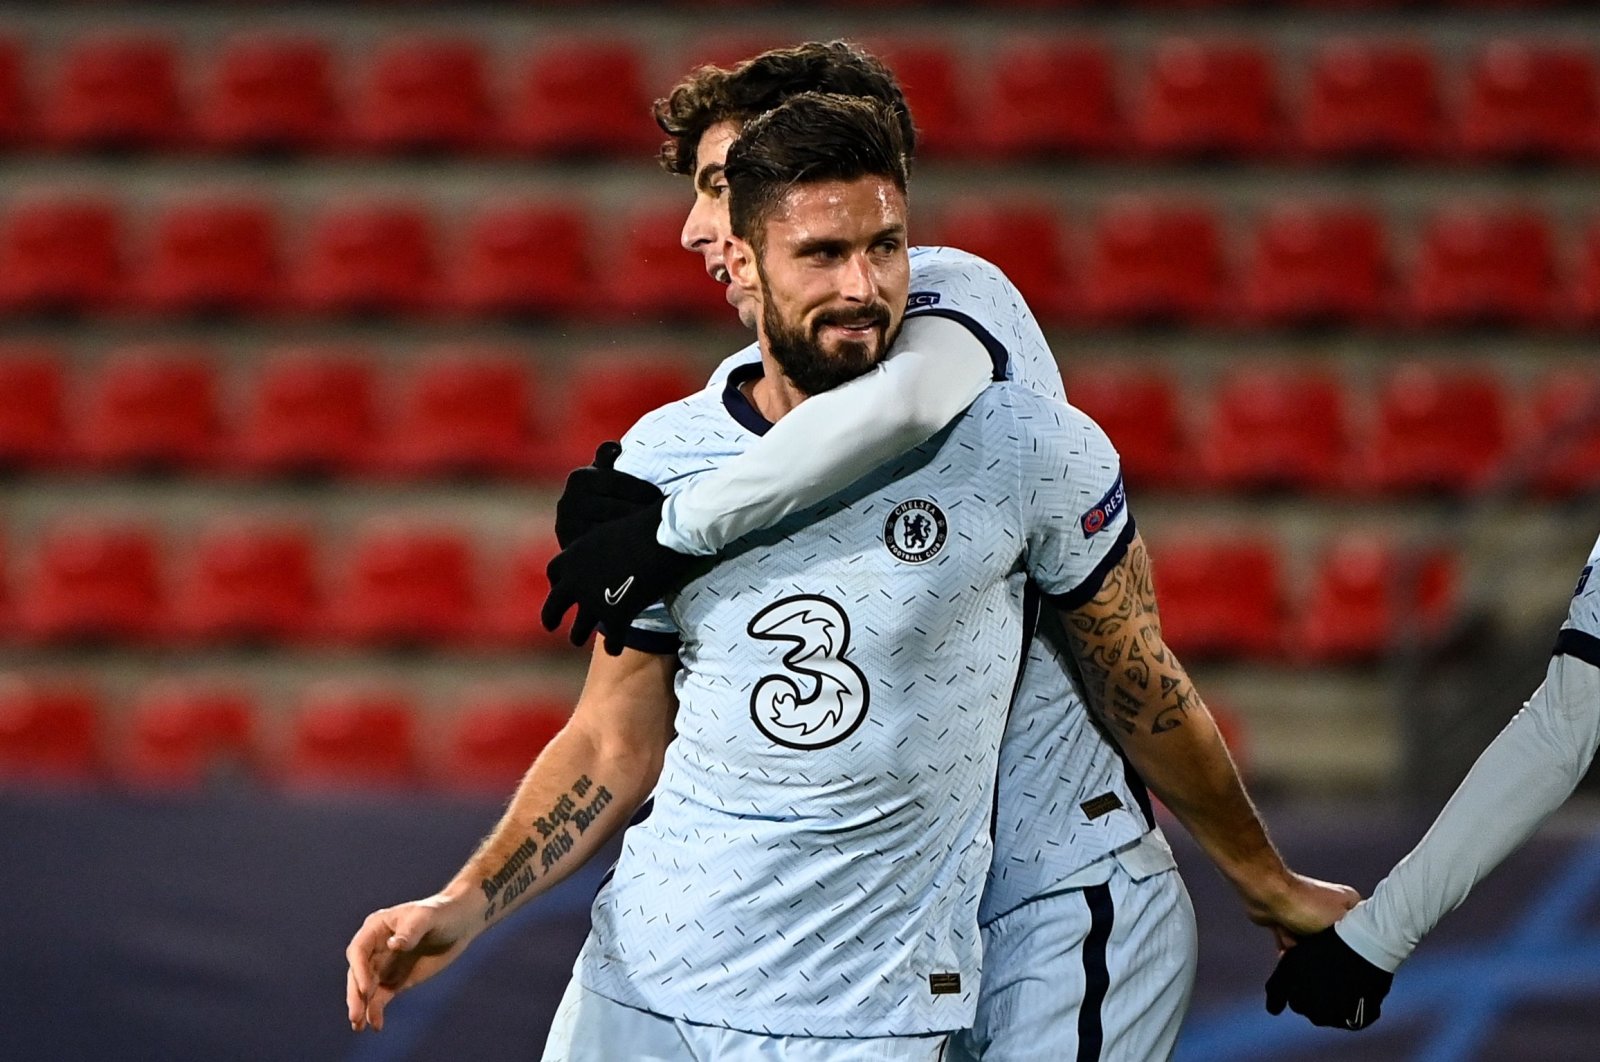 Chelsea's Olivier Giroud celebrates scoring a goal against Rennes during a Champions League match, in Rennes, France, Nov. 24, 2020. (AFP Photo)